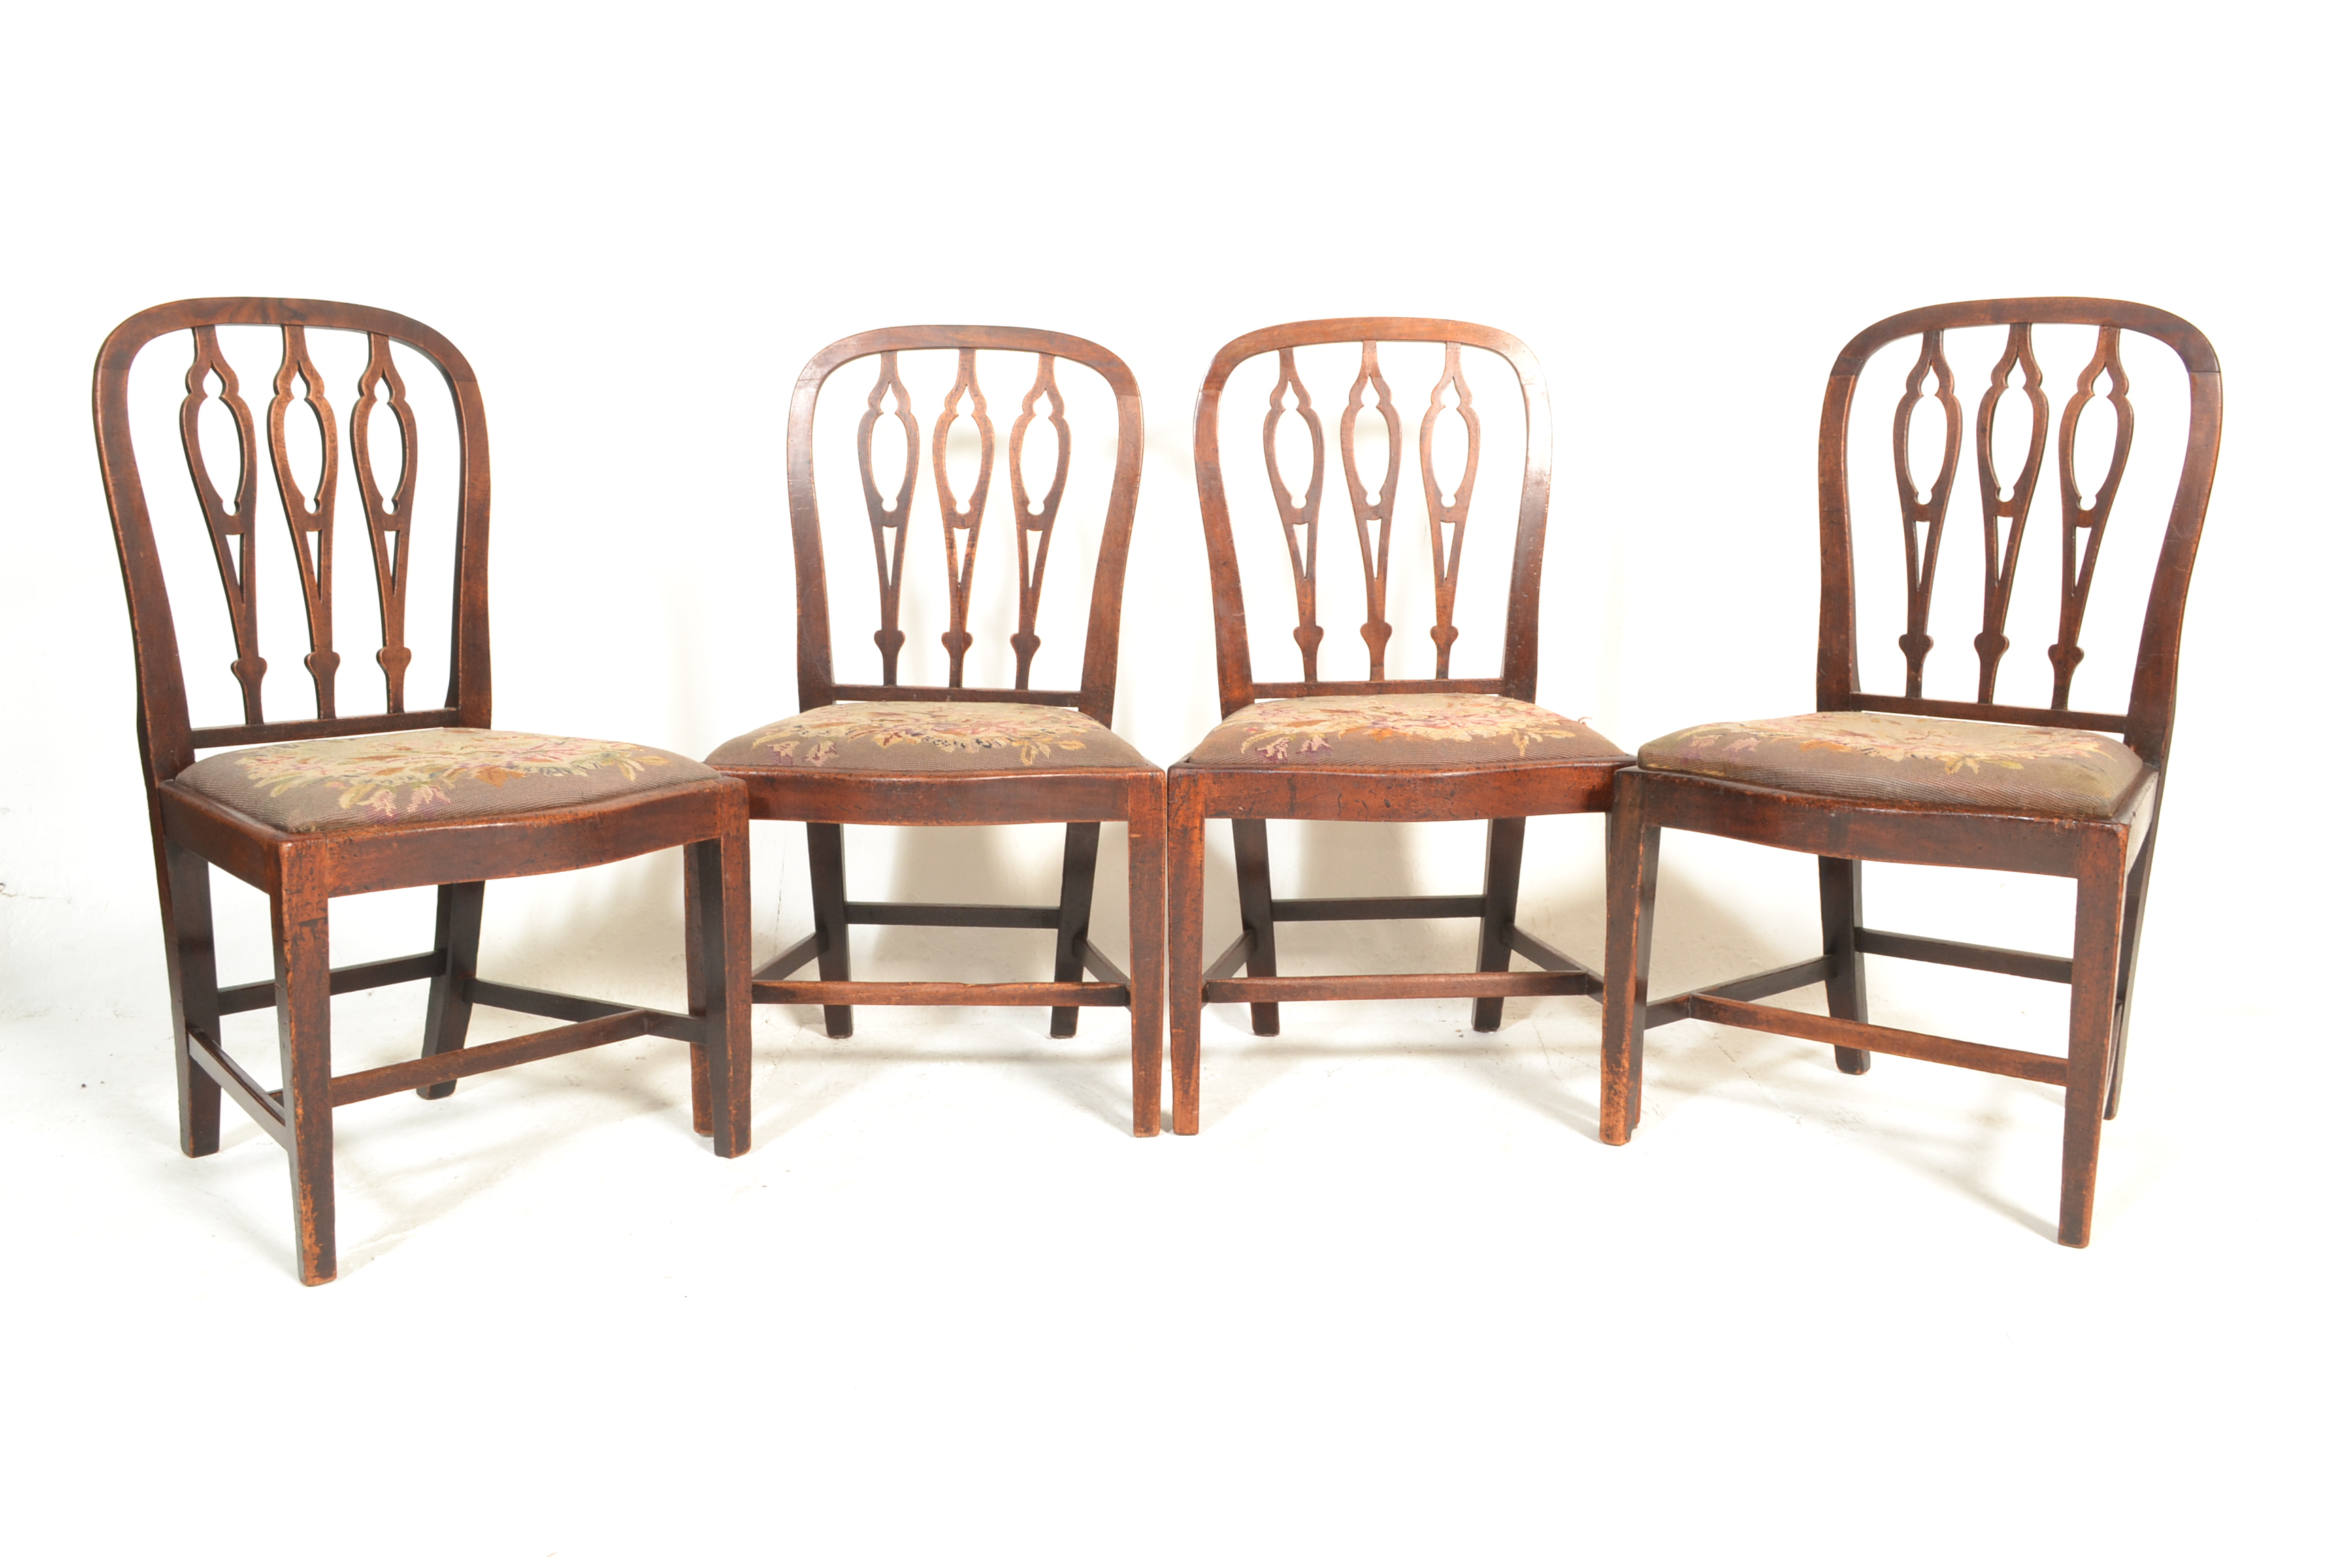 SET OF 6 19TH CENTURY GEORGE III MAHOGANY DINING CHAIRS - Image 2 of 32